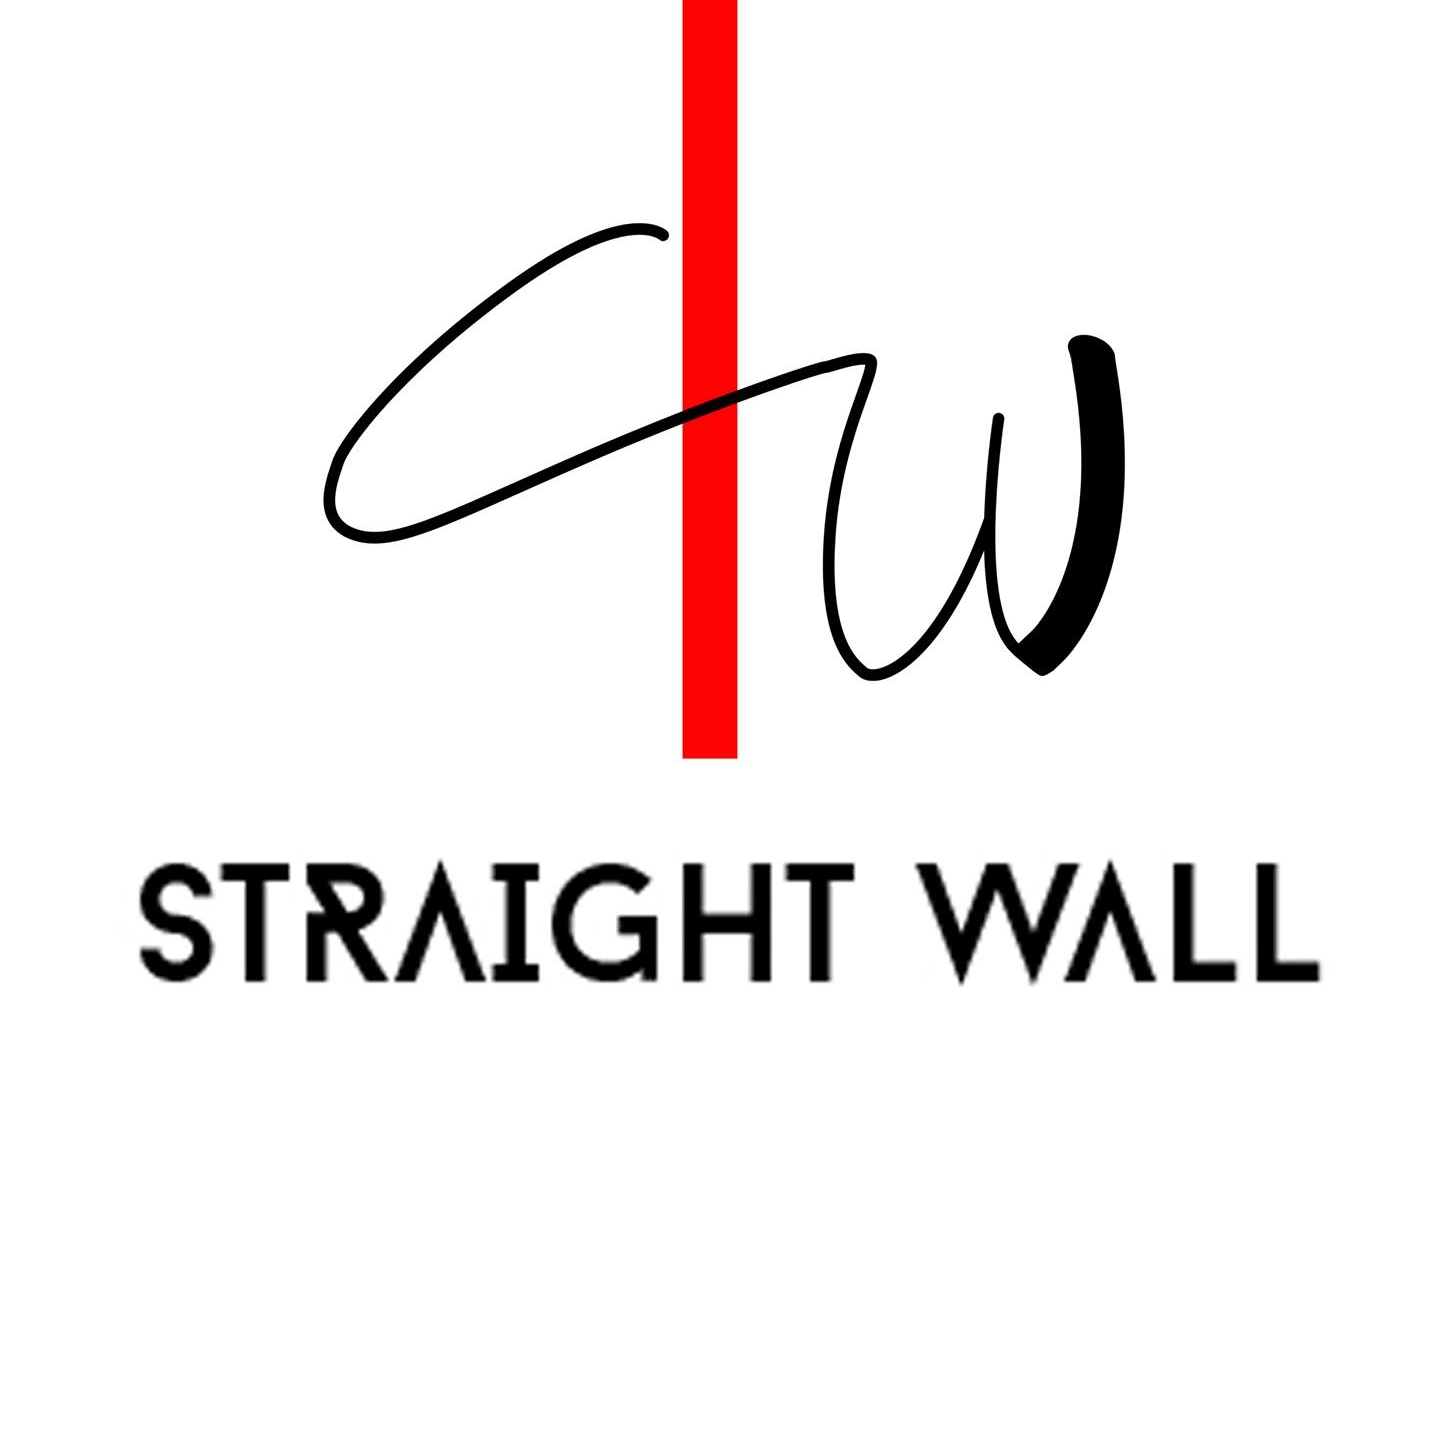 Straightwall Architects|Architect|Professional Services